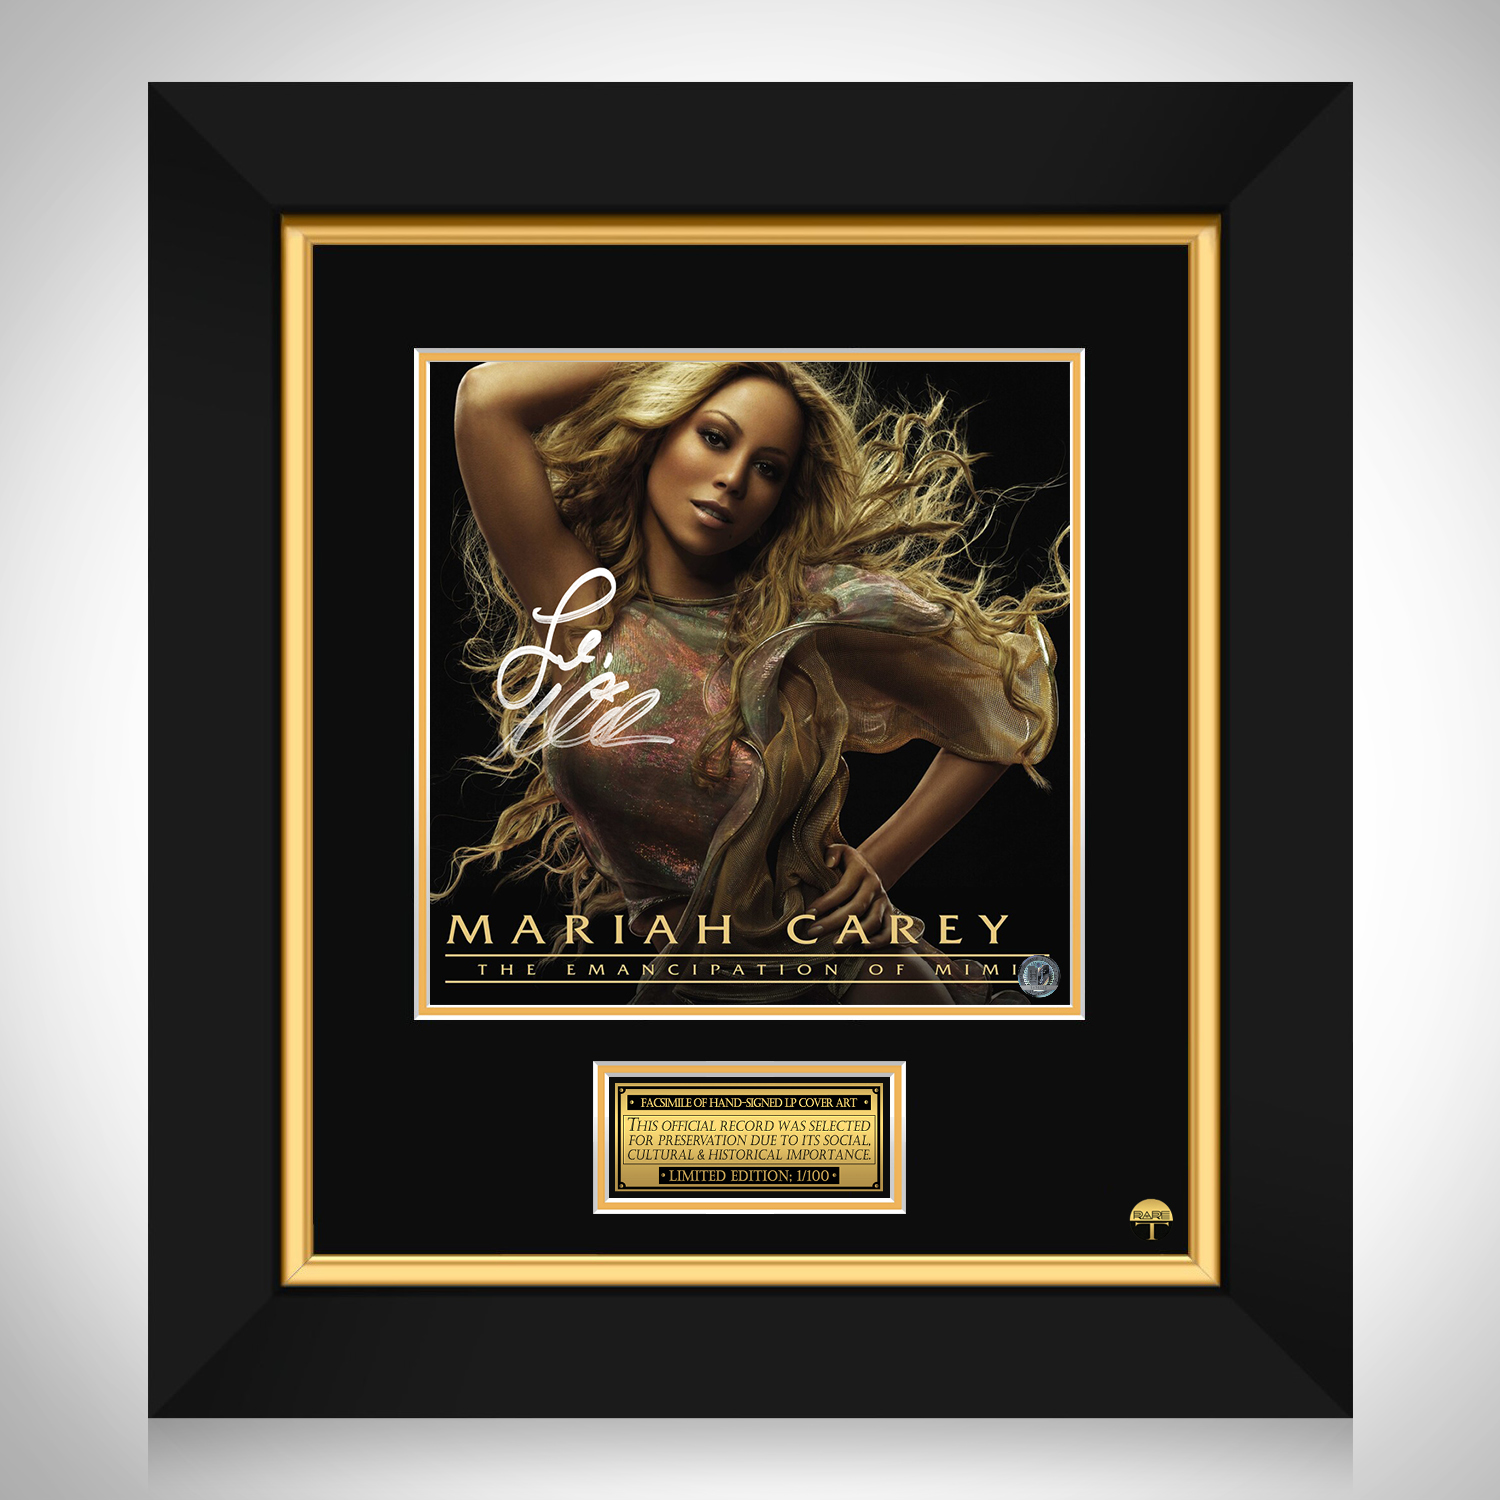 Mariah Carey - The Emancipation of Mimi LP Cover Limited 